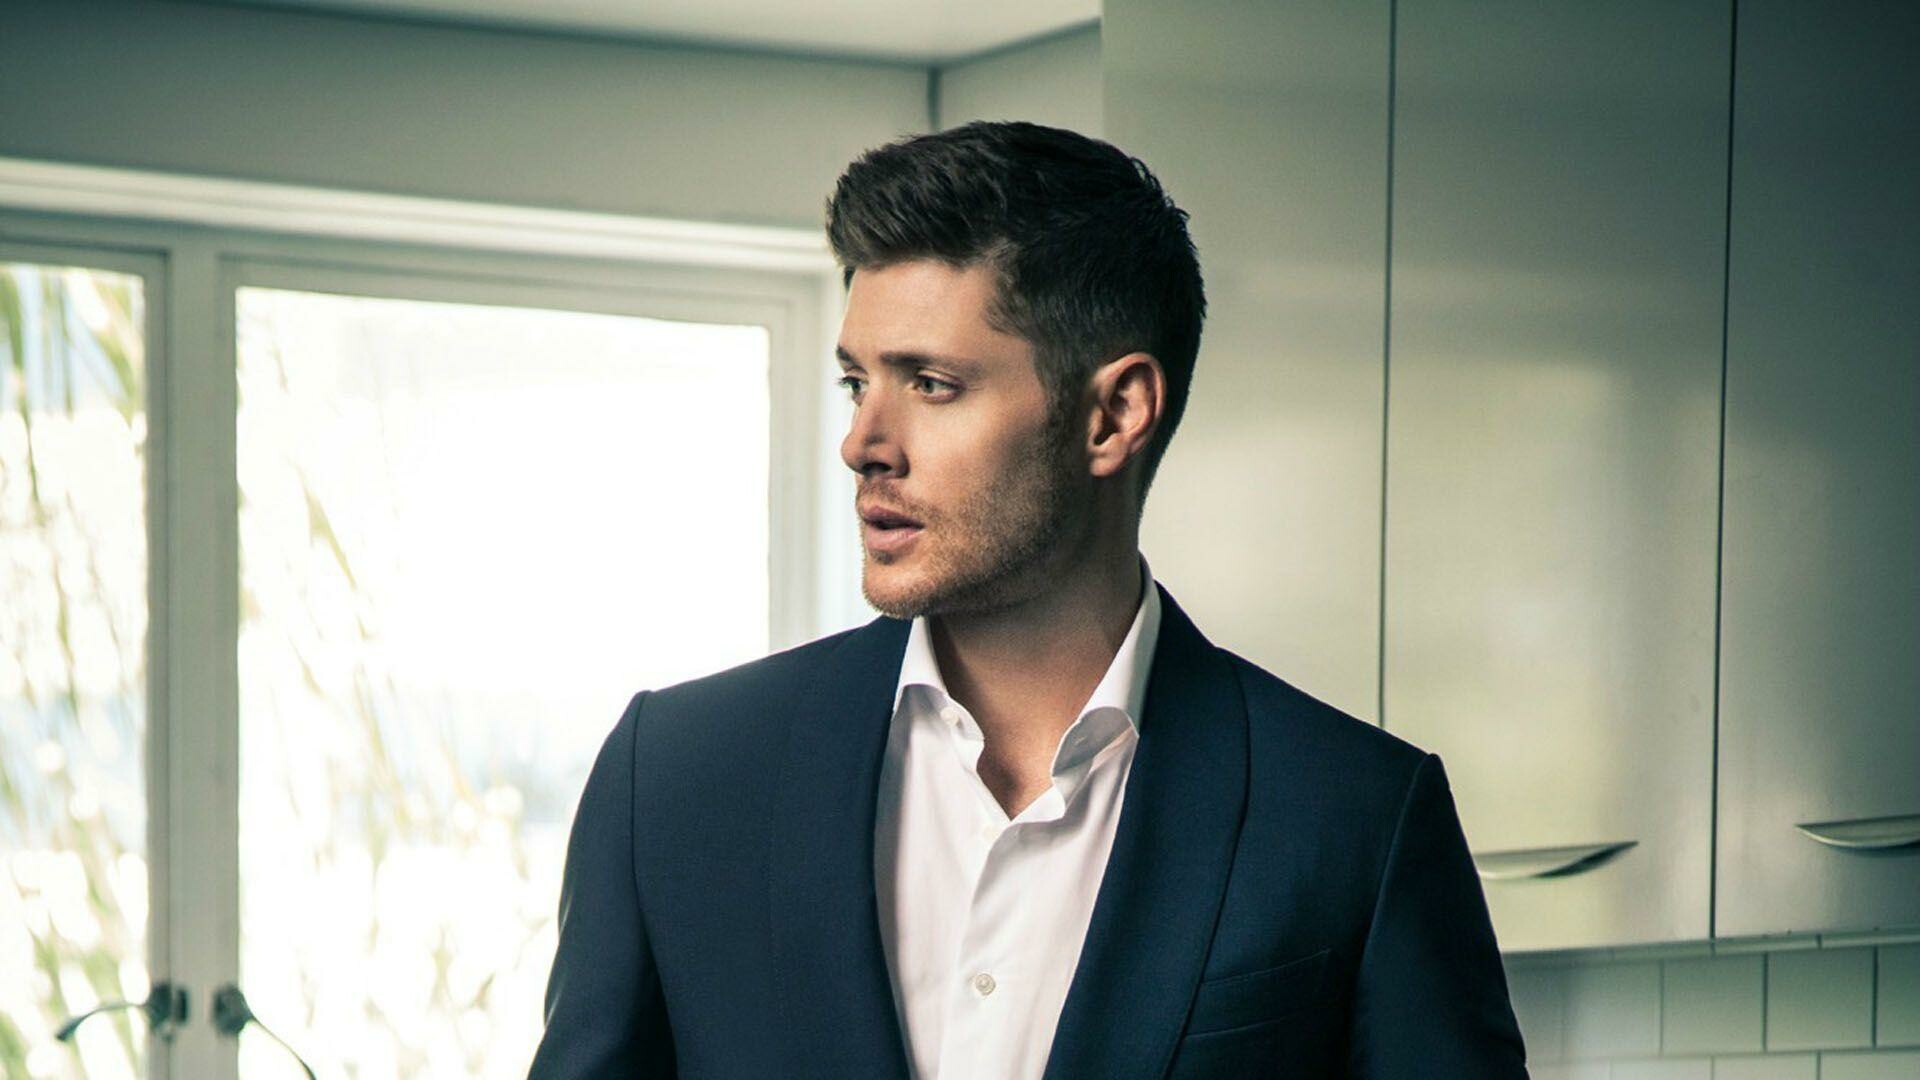 Jensen Ackles: Played Malcolm in an American television sitcom, Mr. Rhodes. 1920x1080 Full HD Wallpaper.